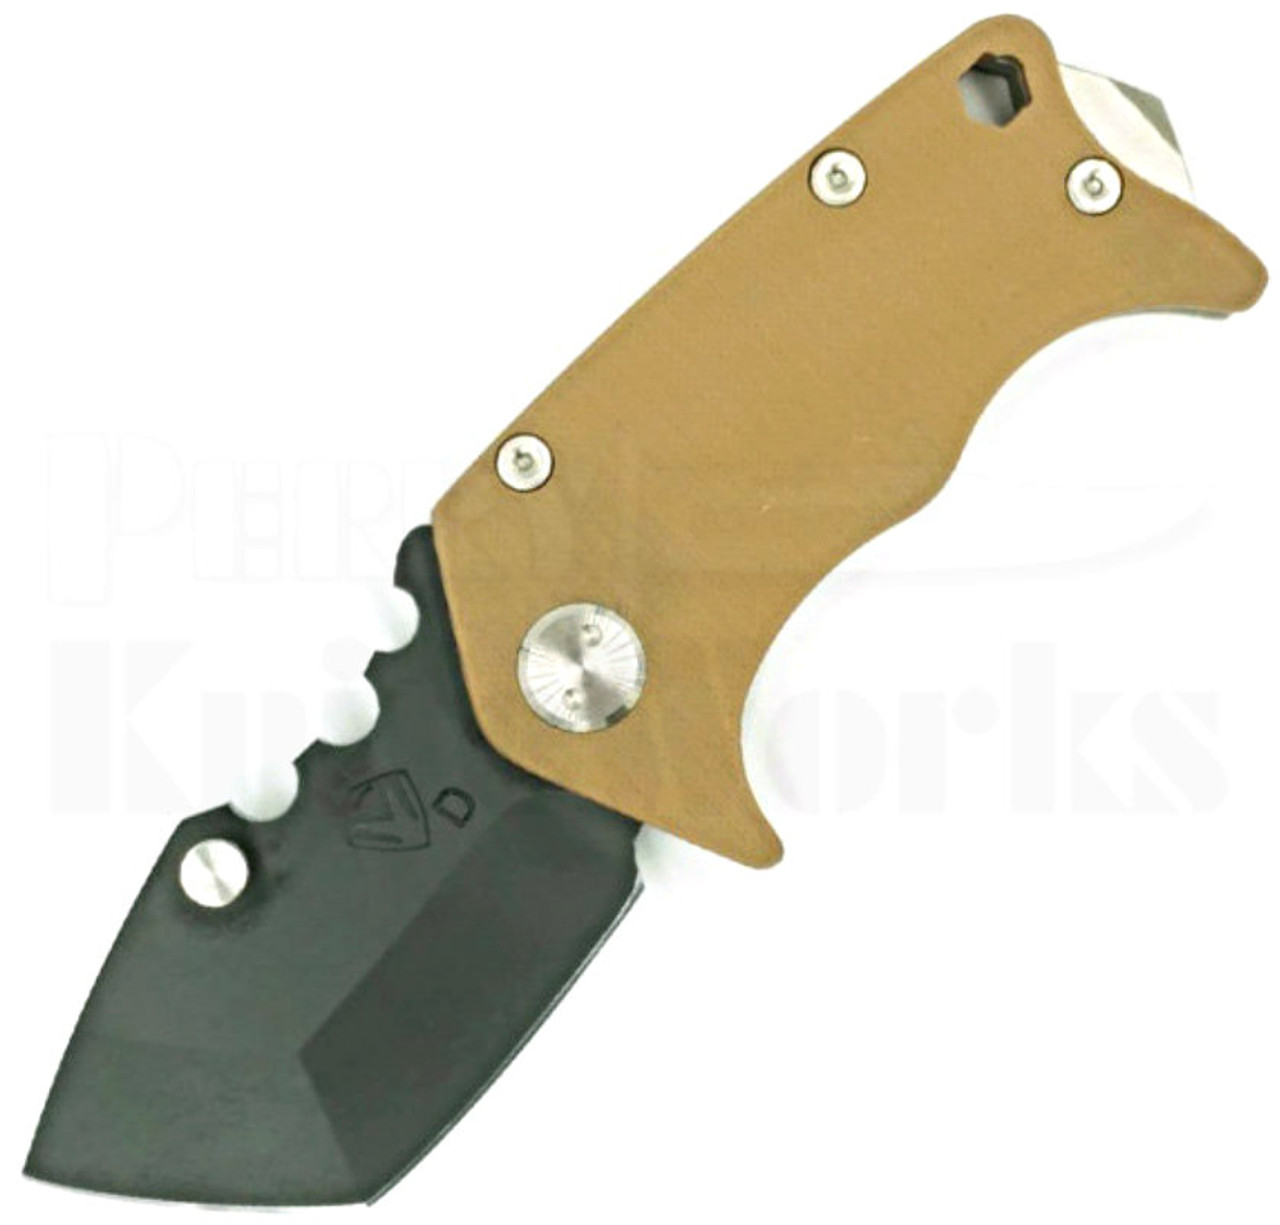 Medford Knife & Tool Panzer Coyote/Tumbled Knife (Black PVD)